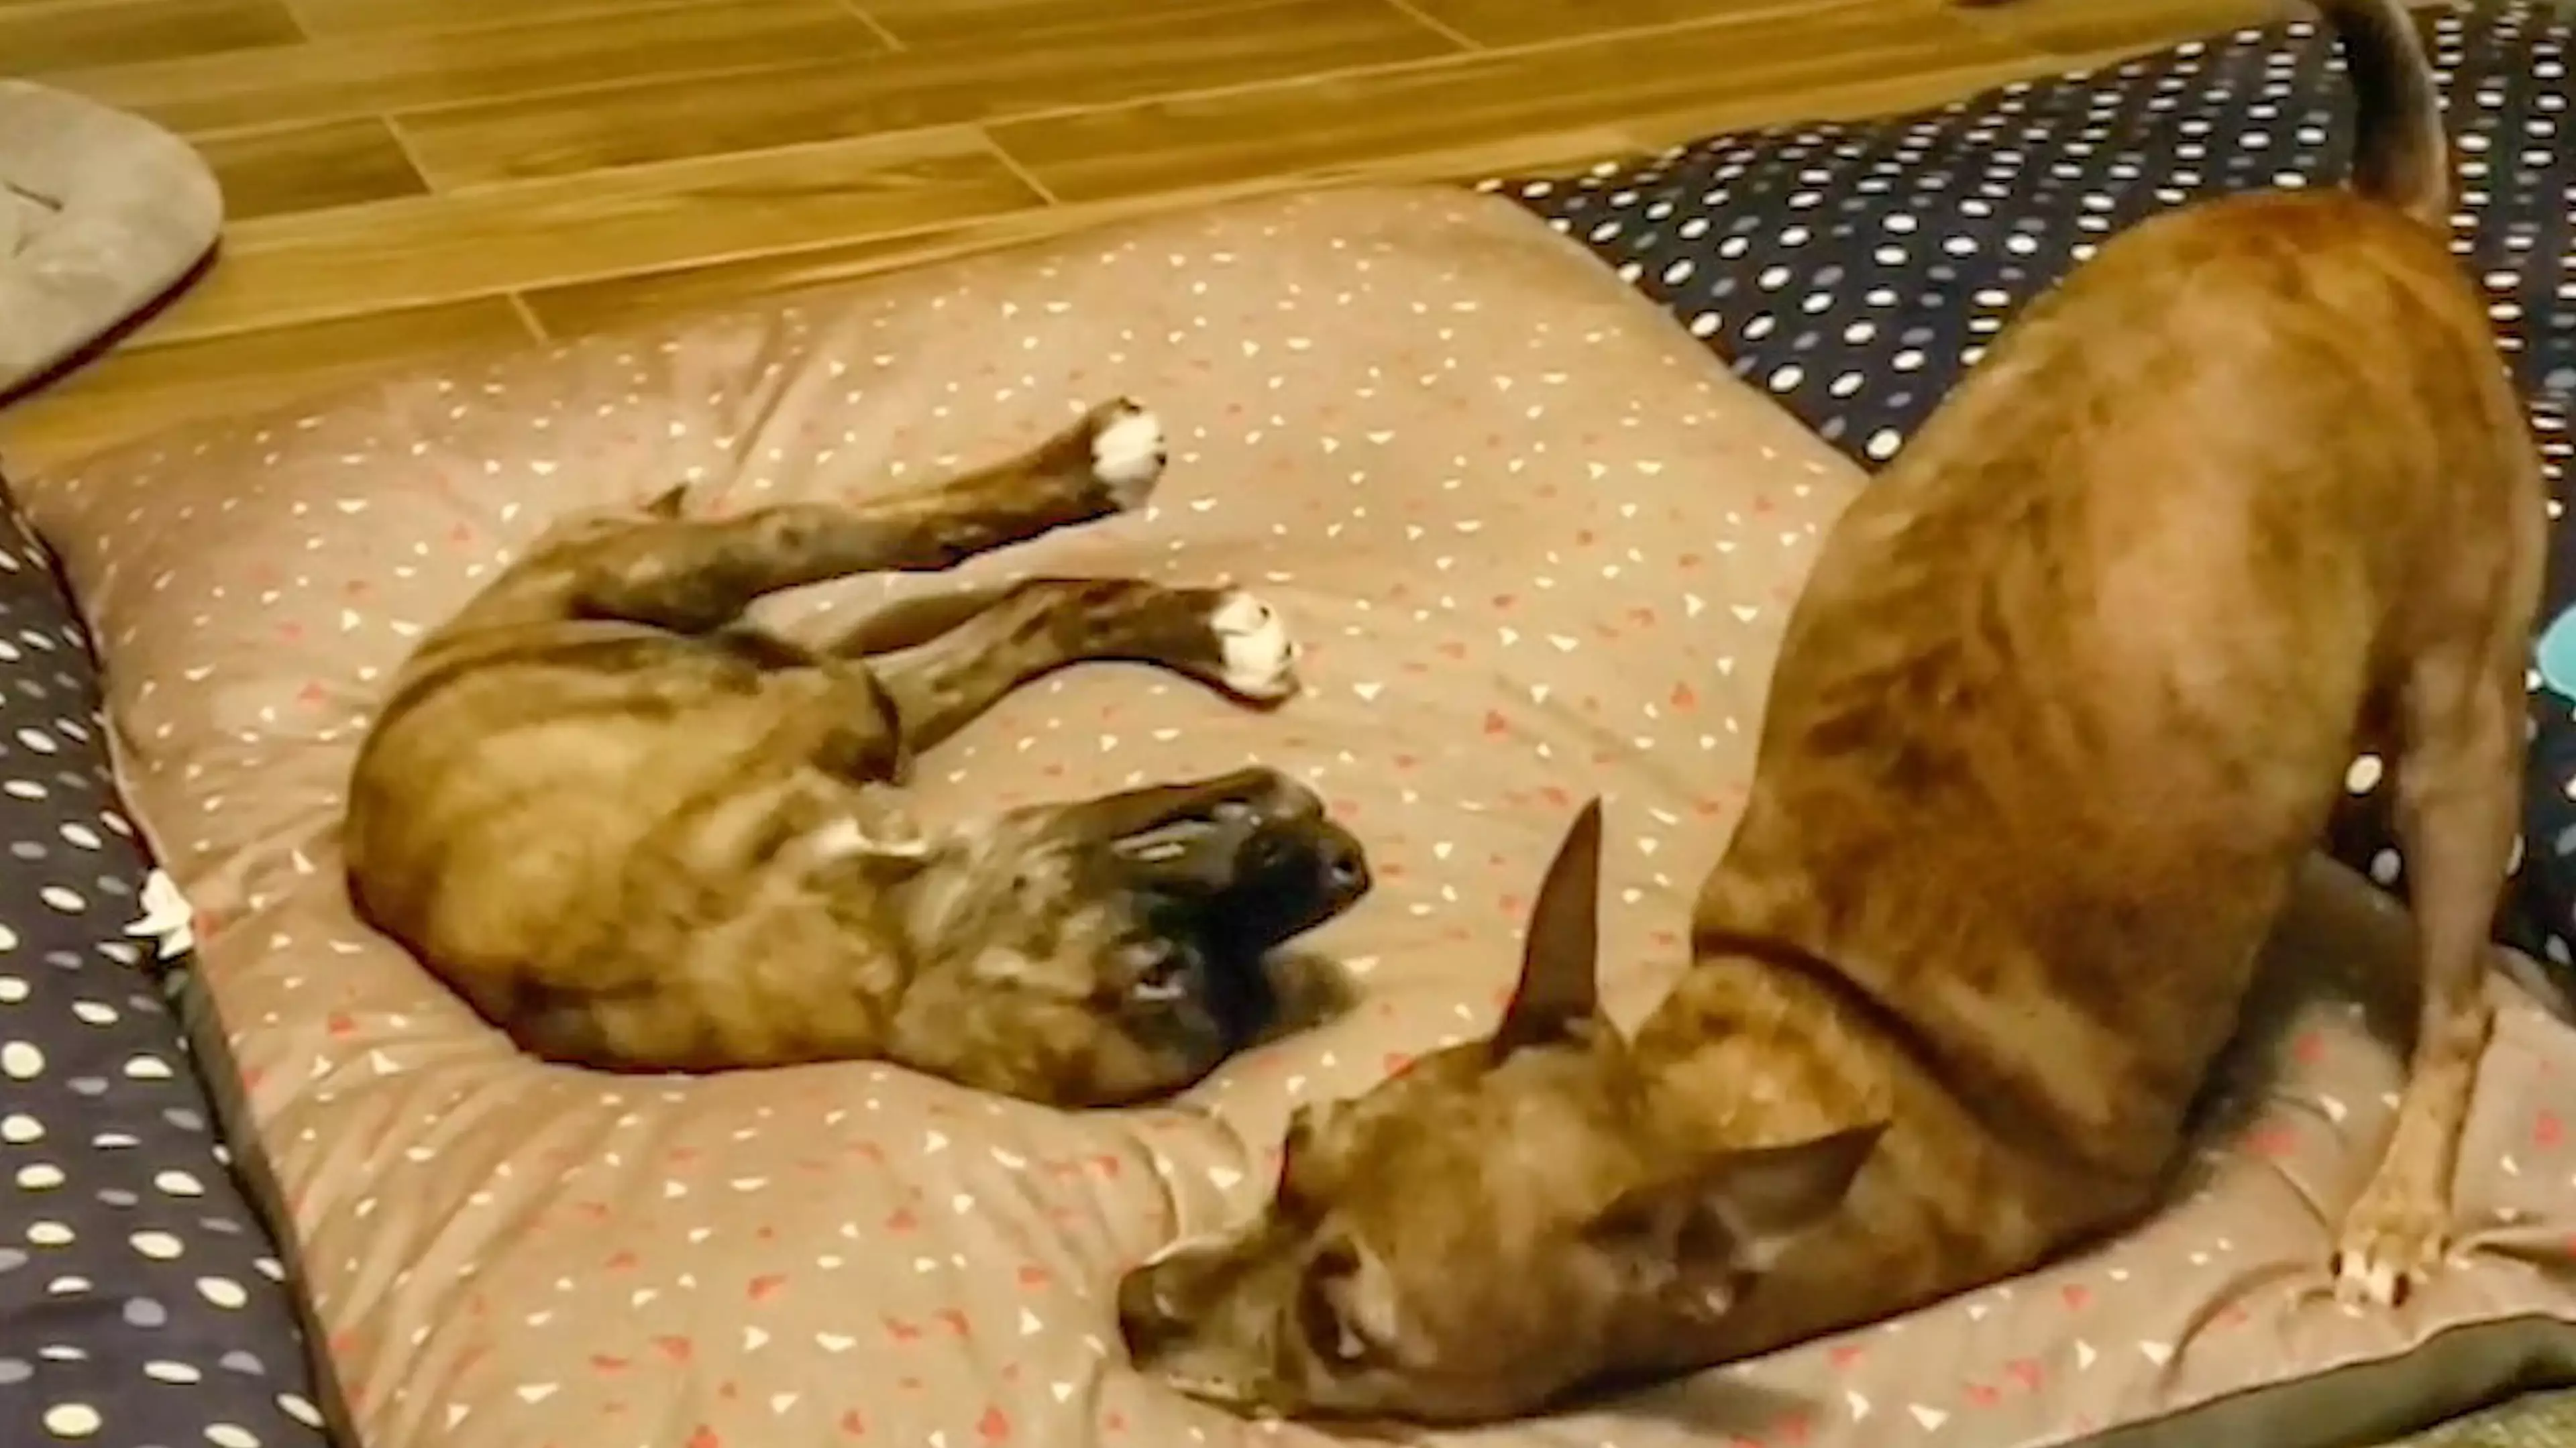 Pair Of Two-Legged Dogs Become Best Mates